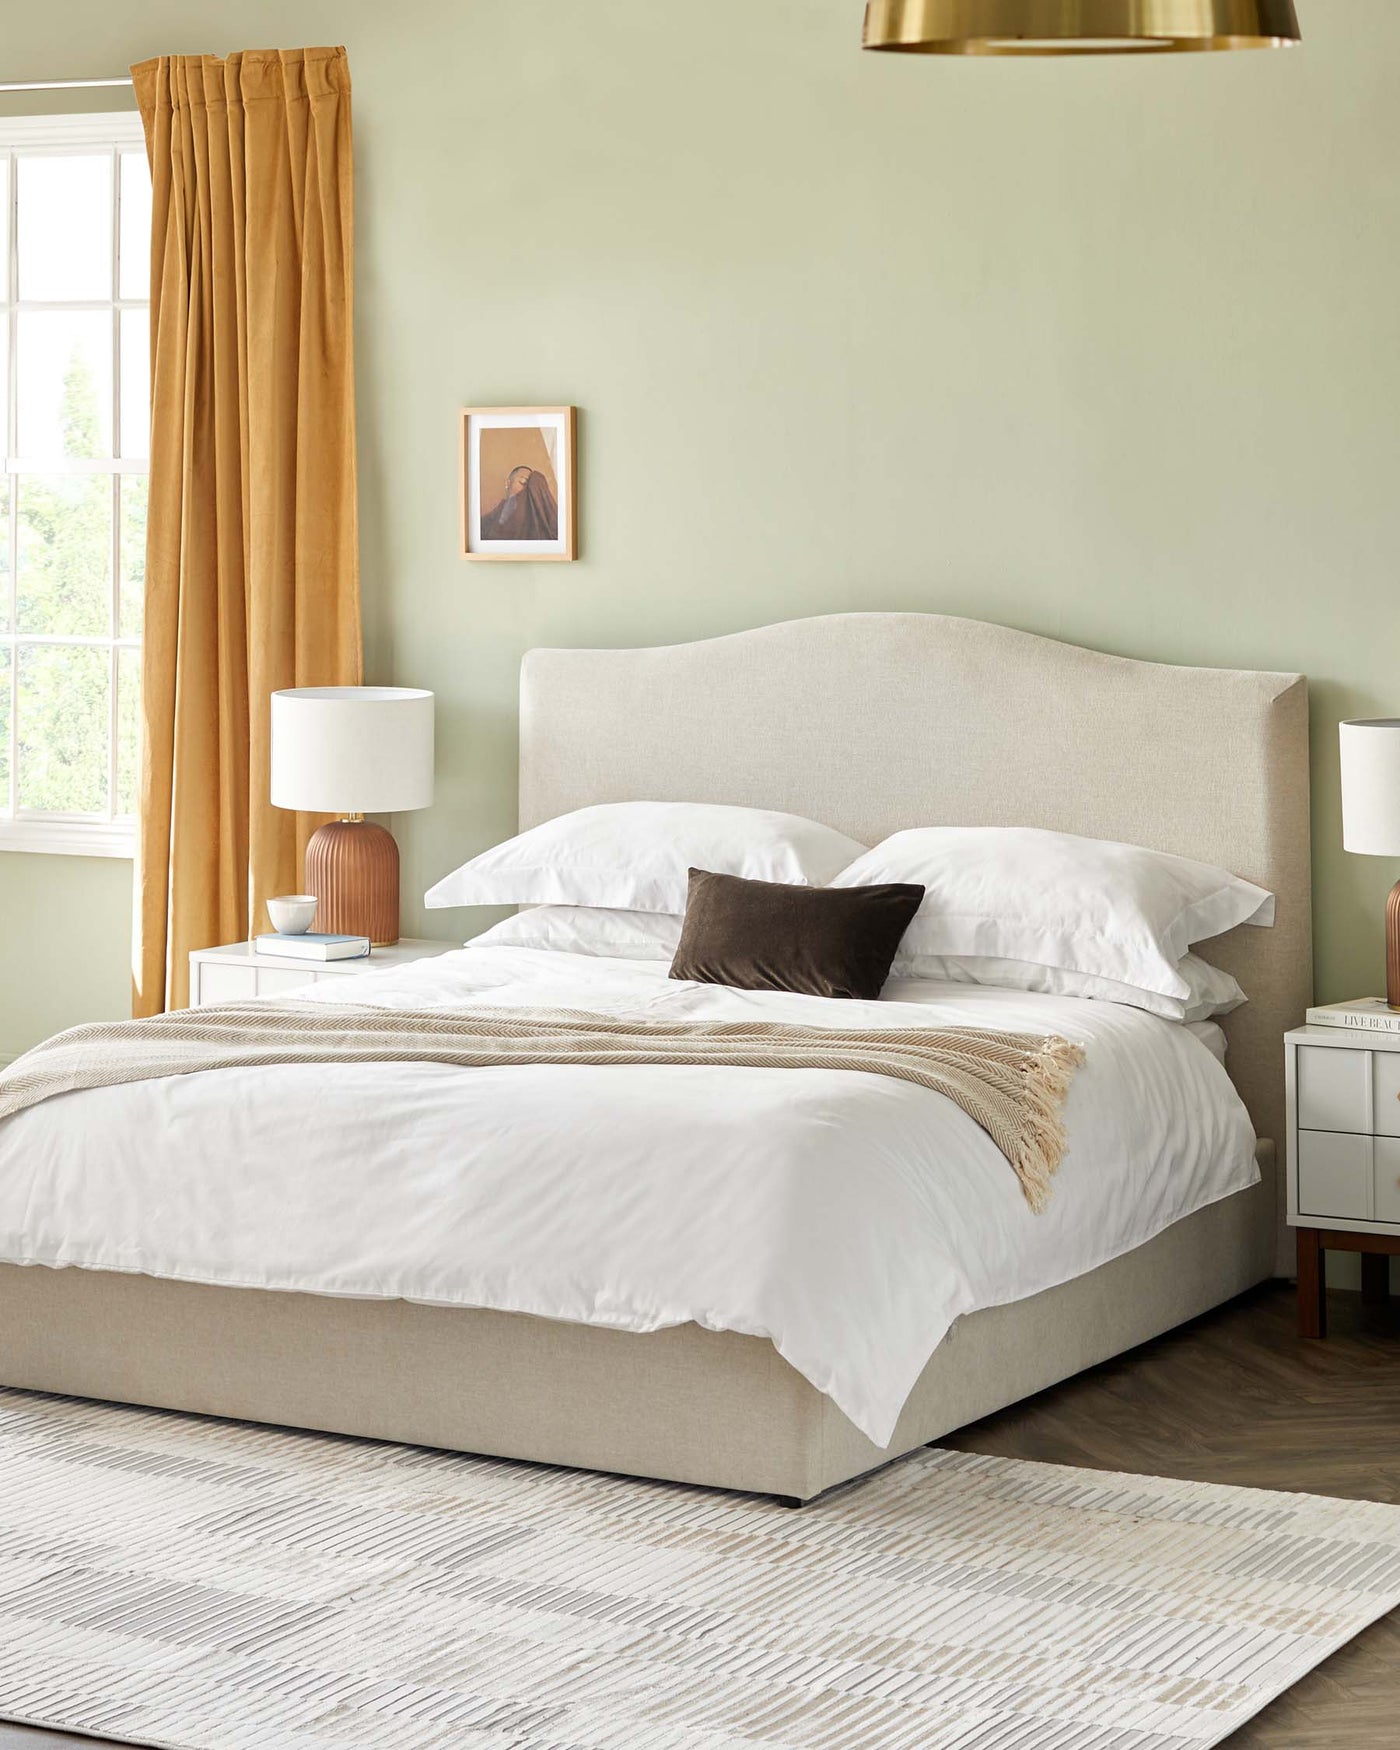 Beige upholstered bed frame with a curved headboard, white bedding, and accent pillows. Two white bedside tables with a wood finish top and storage drawers. A beige area rug with a white pattern.